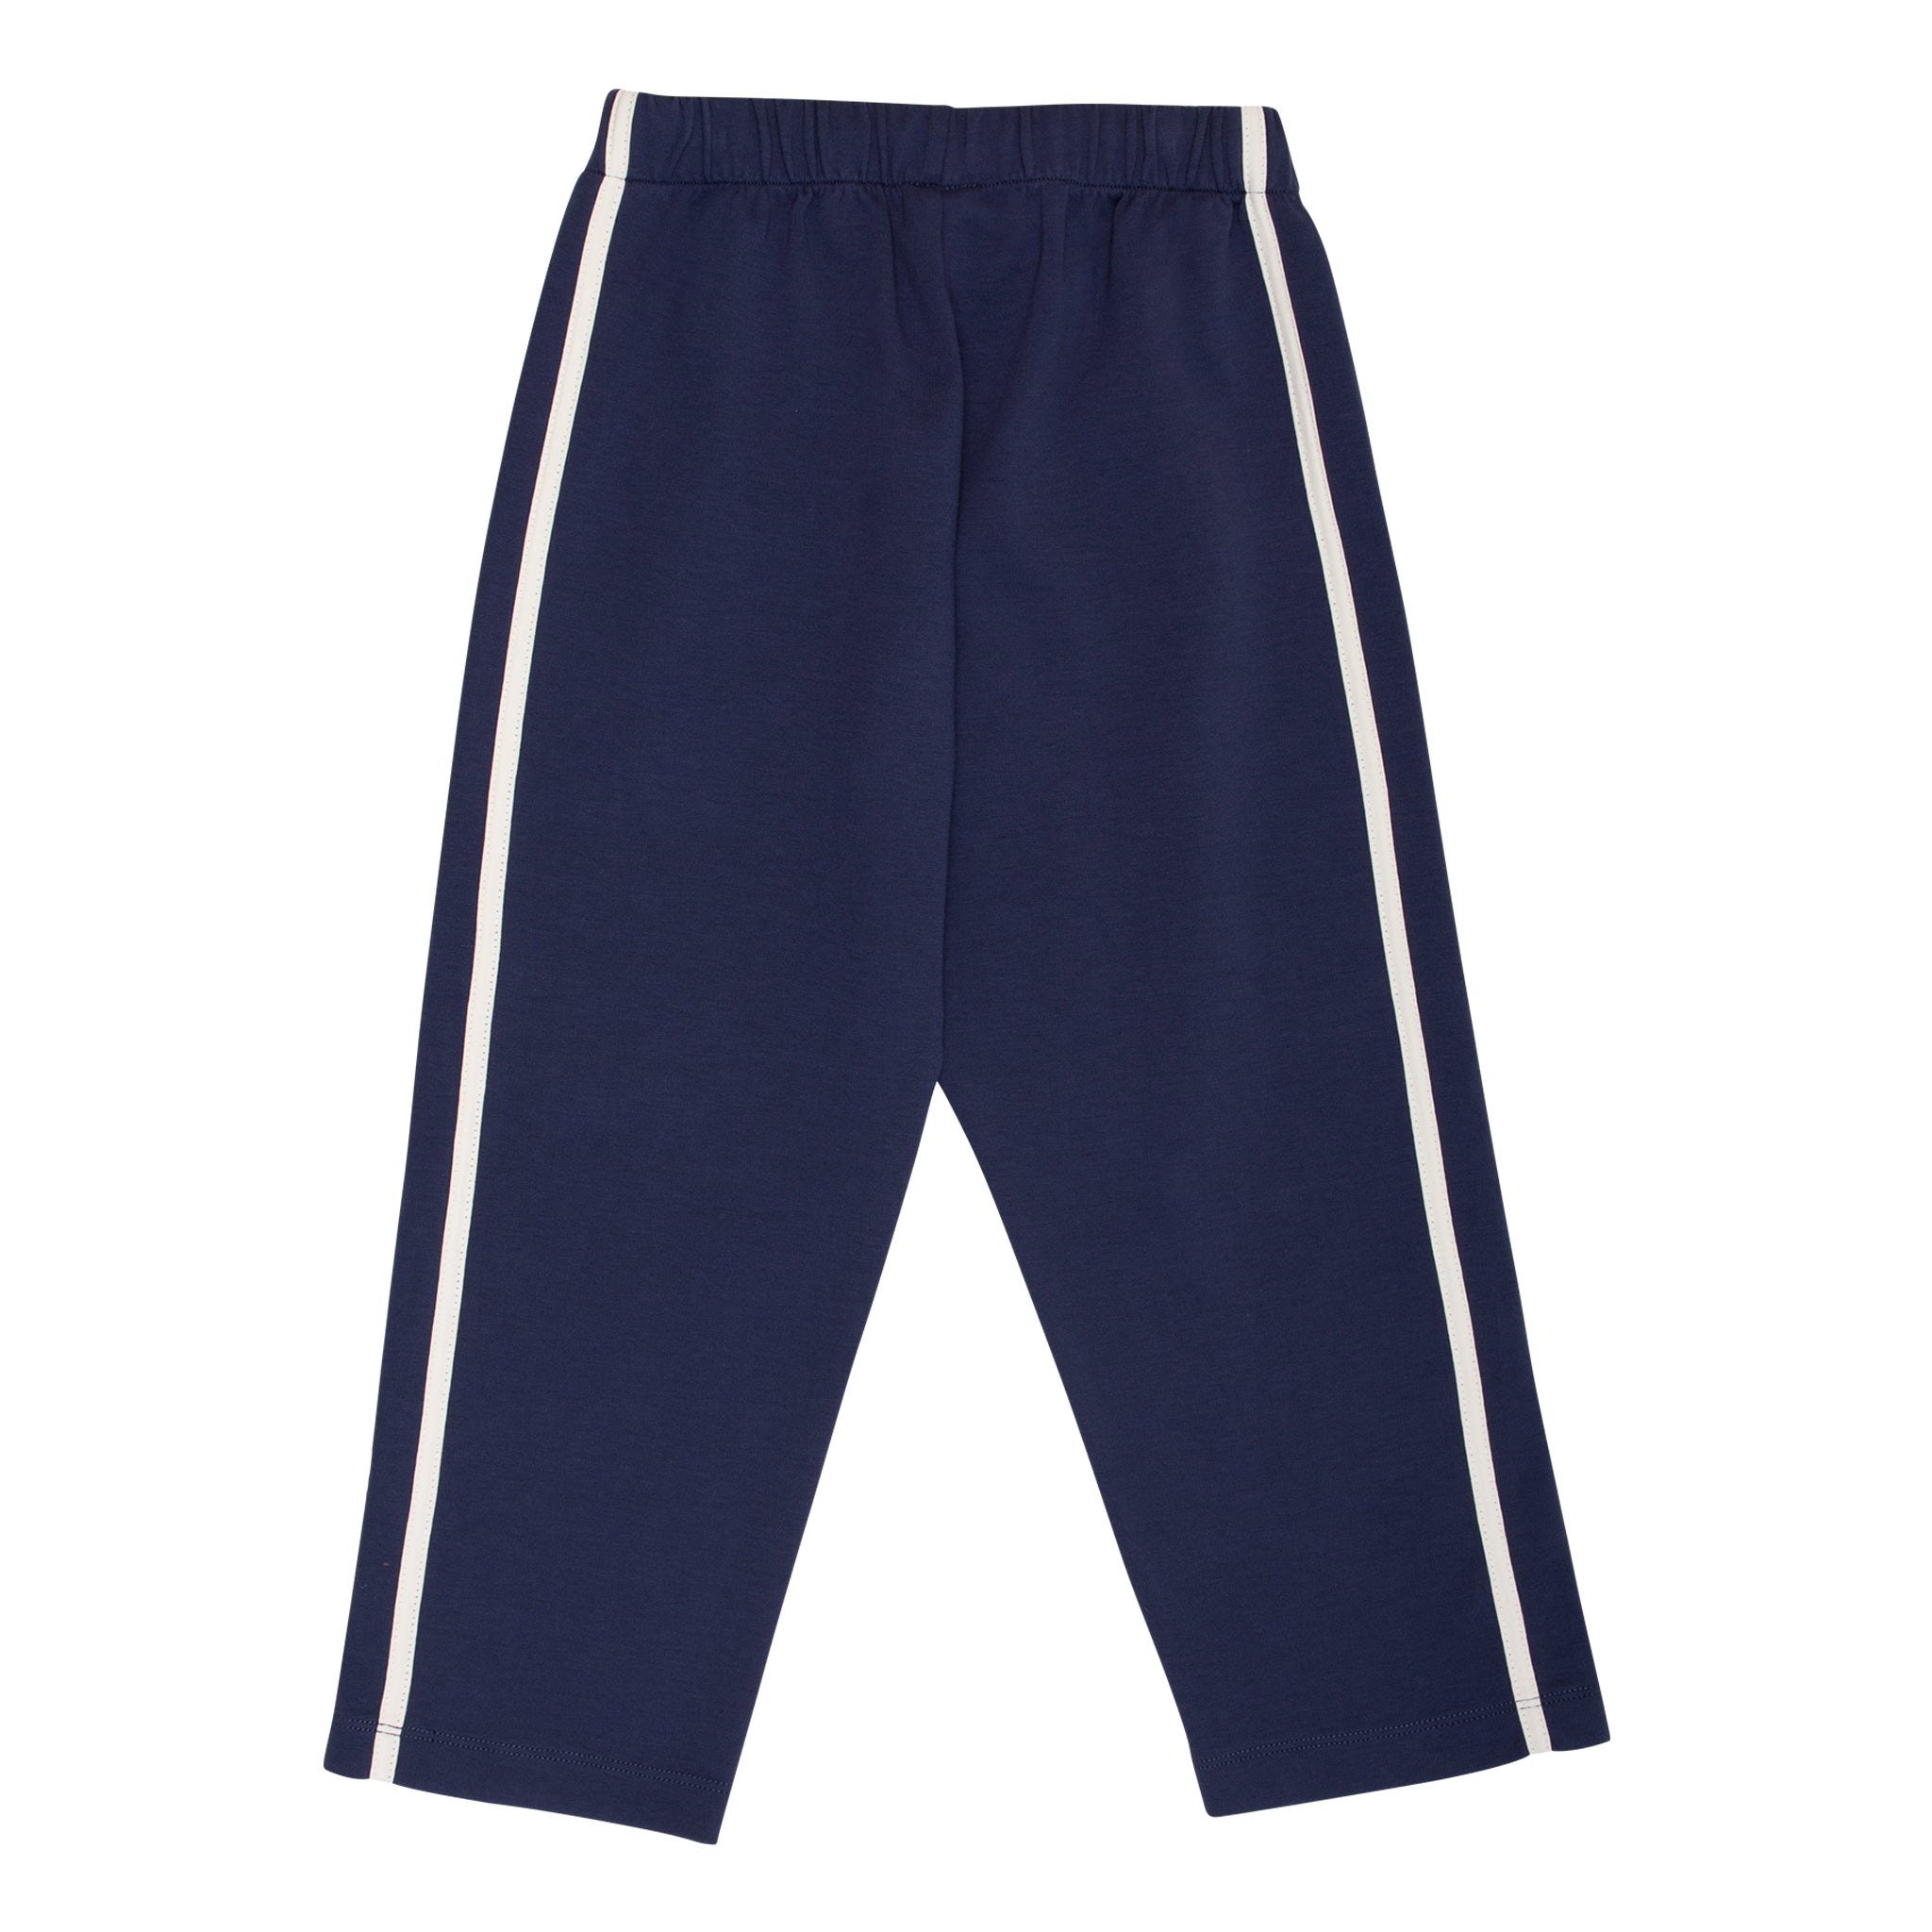 Double You Sweat Pant - Navy